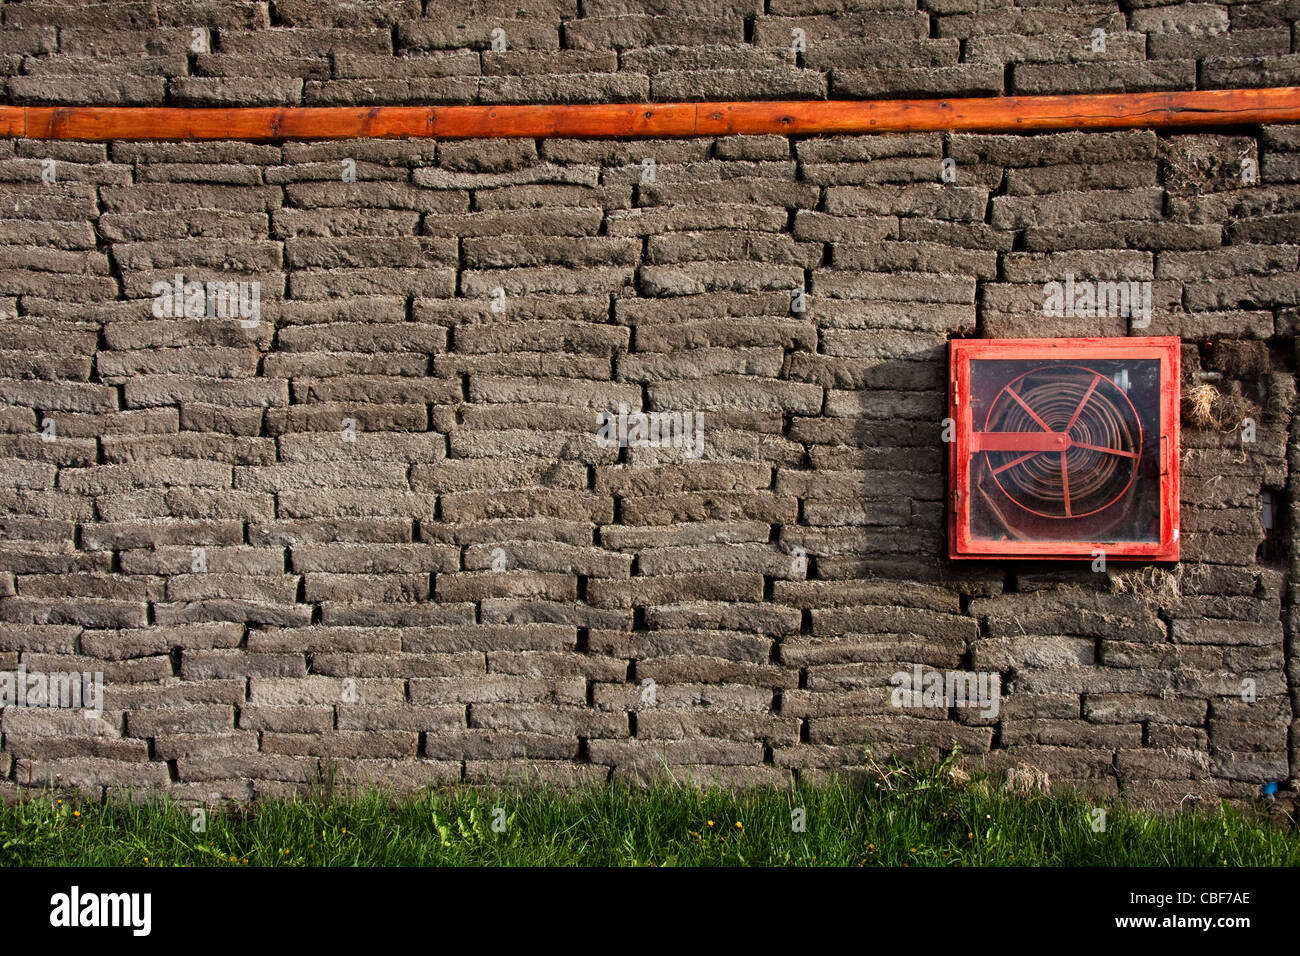 turf wall in eco building with fire hose Stock Photo